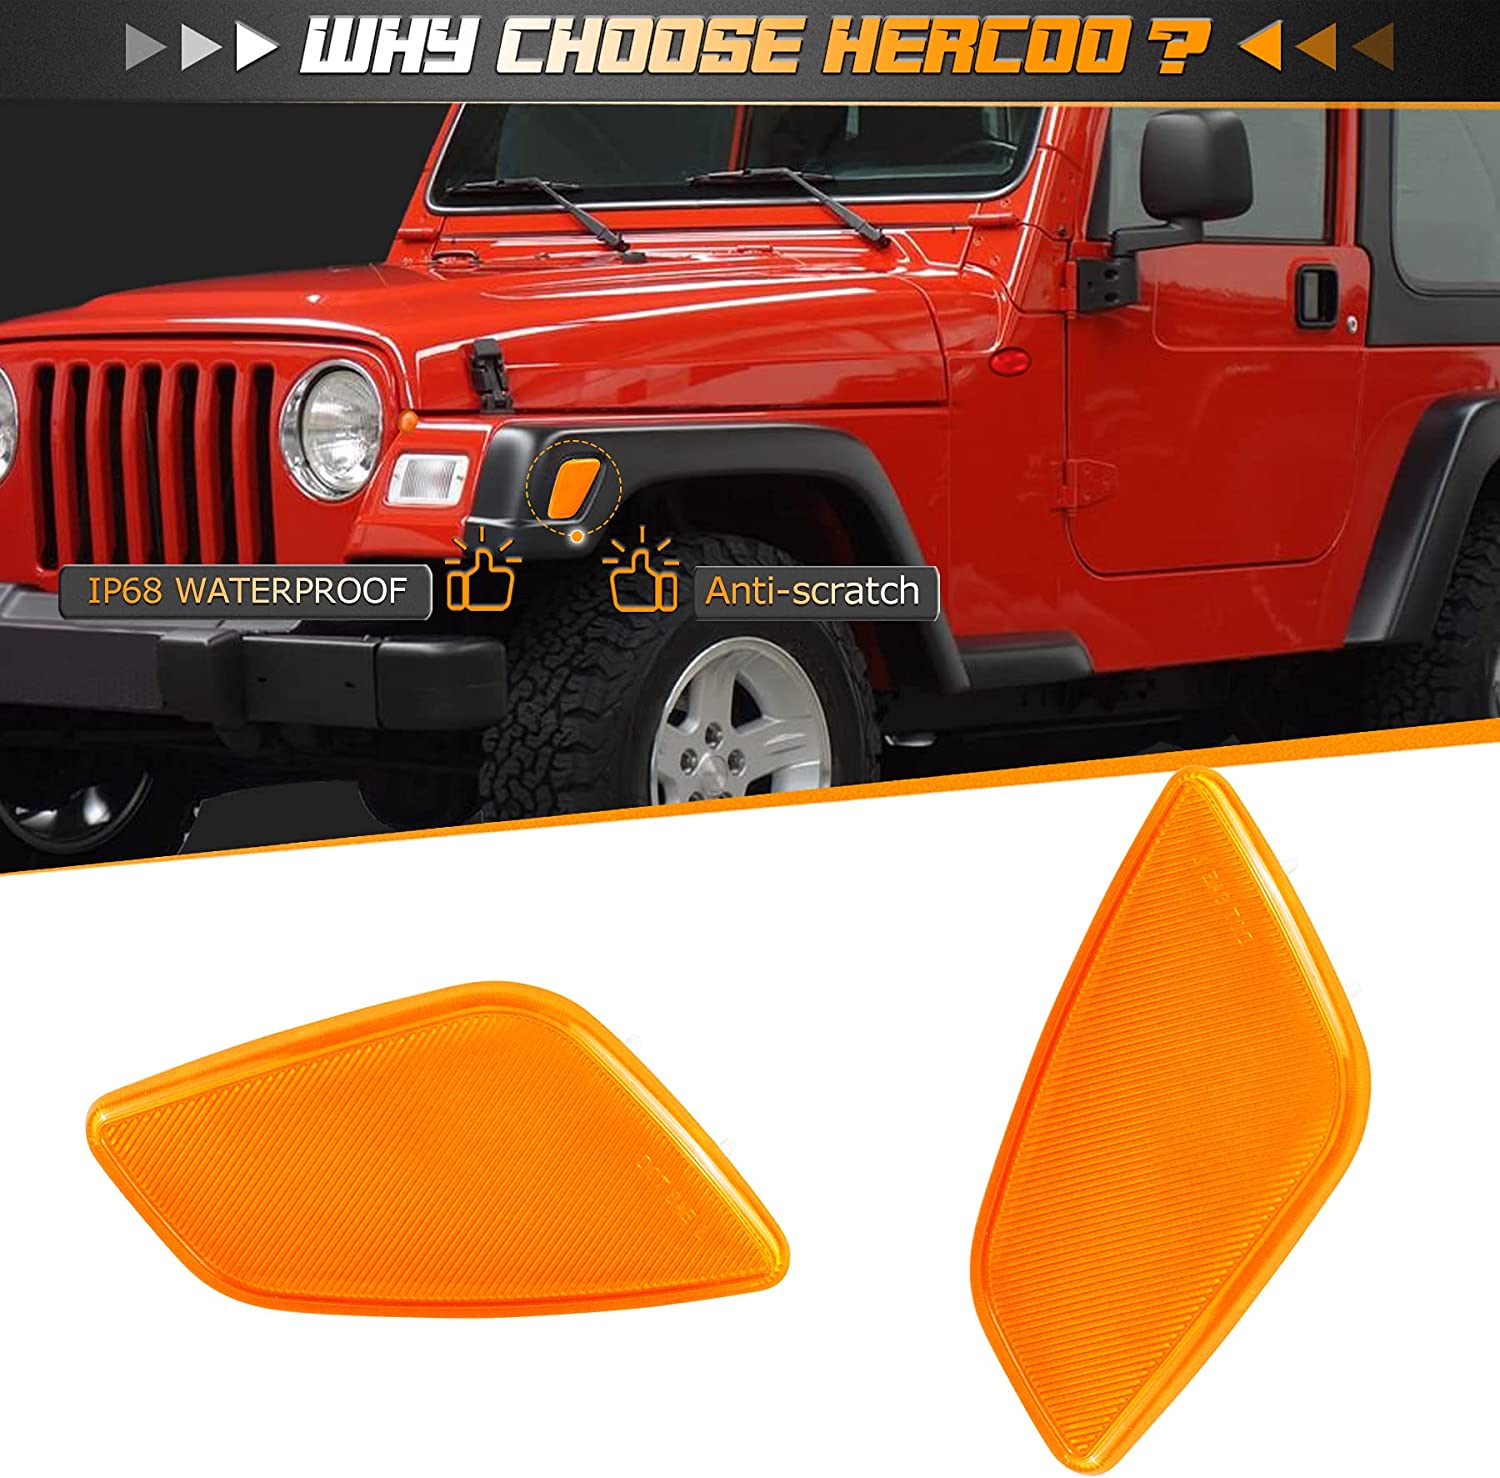 HERCOO LED Park Signal Side Marker Lights Lamps Cover Lens Amber Bulbs Driver and Passenger Front Marker Light Housing Assembly Compatible with Jeep Wrangler 1997-2006